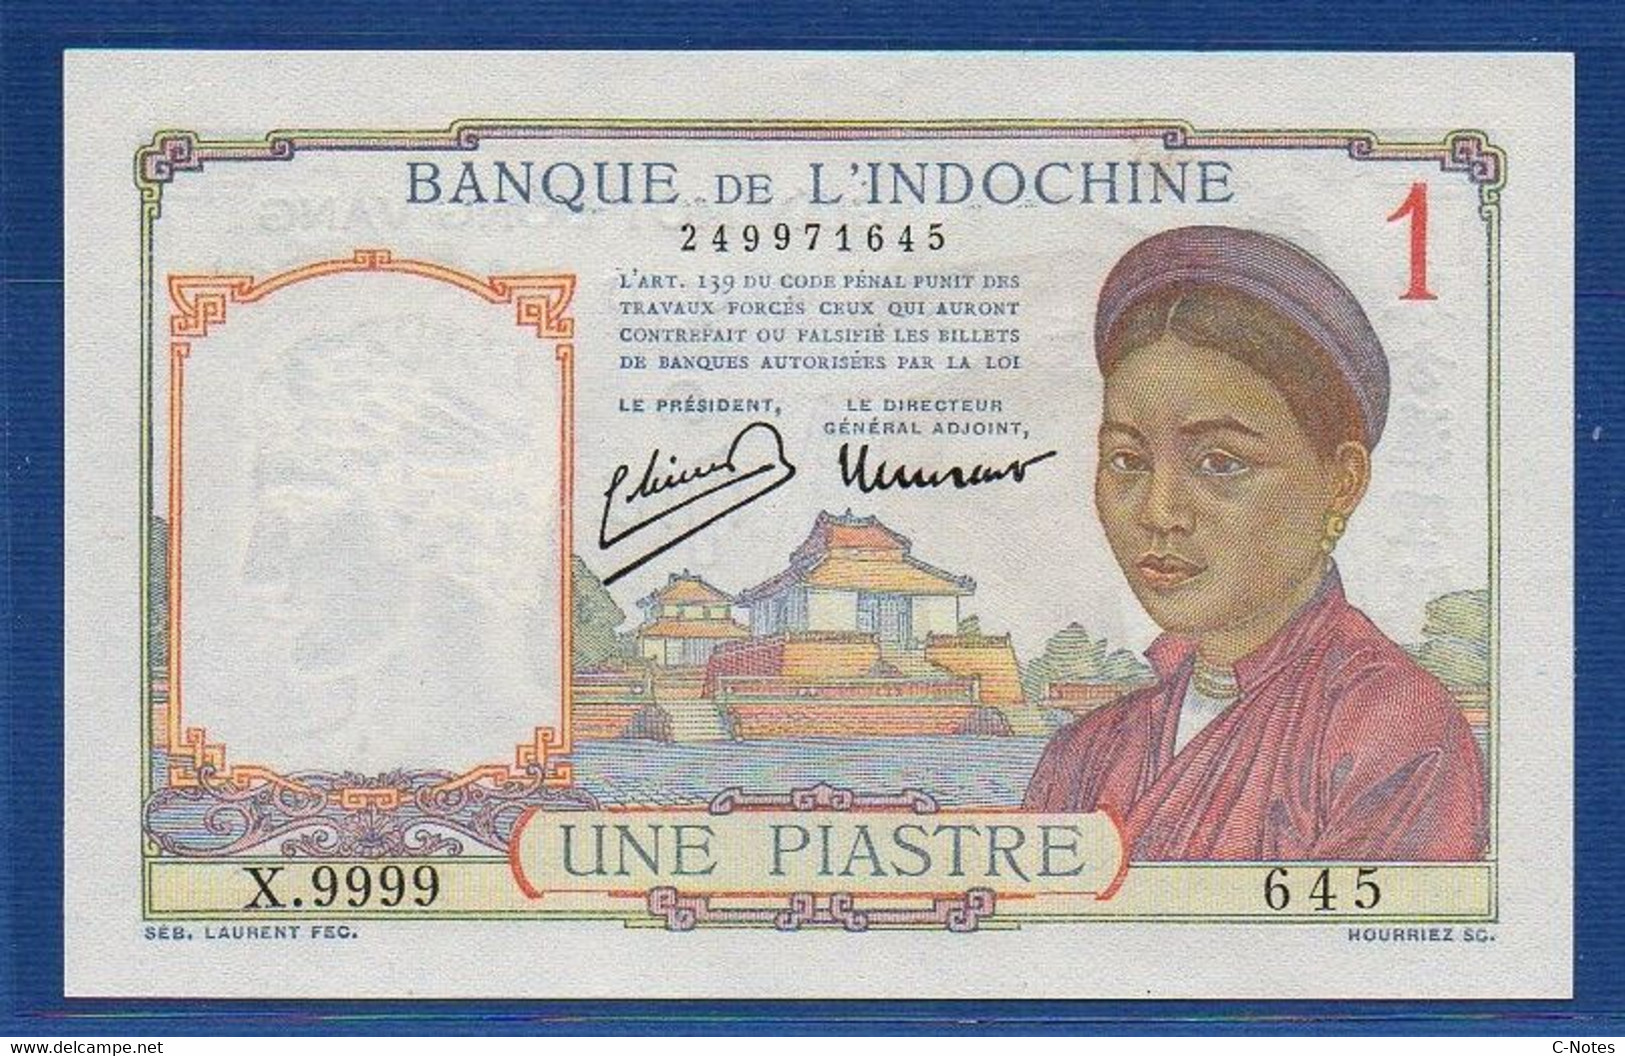 FRENCH INDOCHINA - P. 54e –  1 Piastre ND (1949) UNC-, S/n X.9999 645  Nice Serial - Indochine